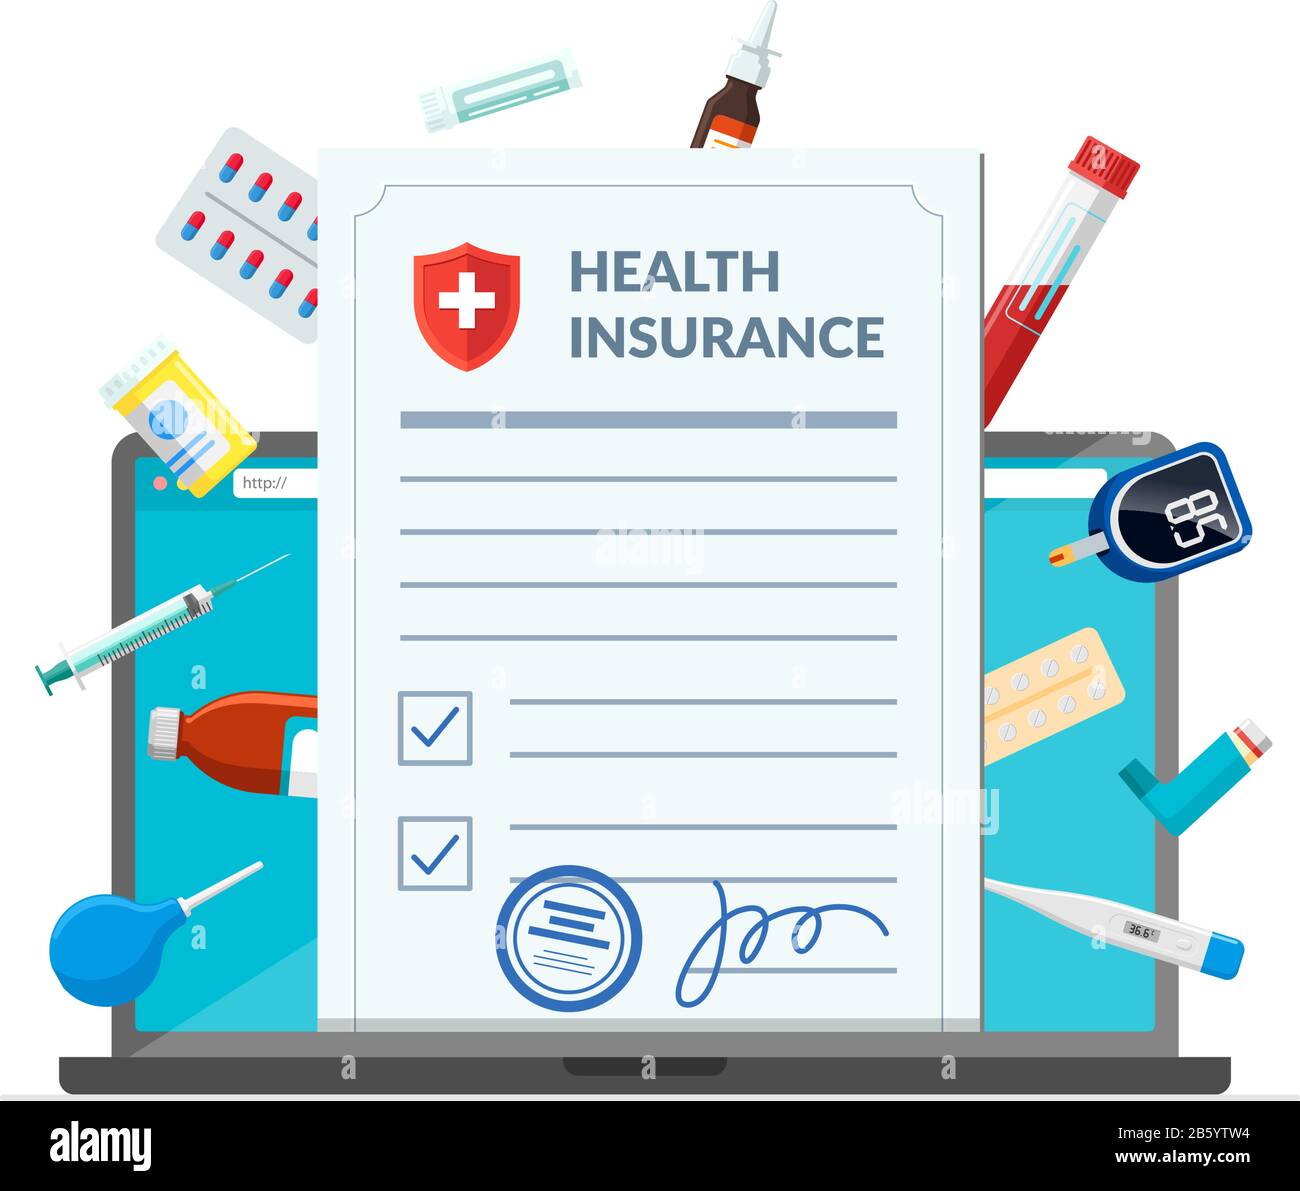 Health Insurance Policy With Medical Supplies Medicine Drugs Pills Tablets On Laptop Screen Online Healthcare Service And Pharmacy Medications Concept Modern Flat Design Concept Vector Illustration Stock Vector Image Art